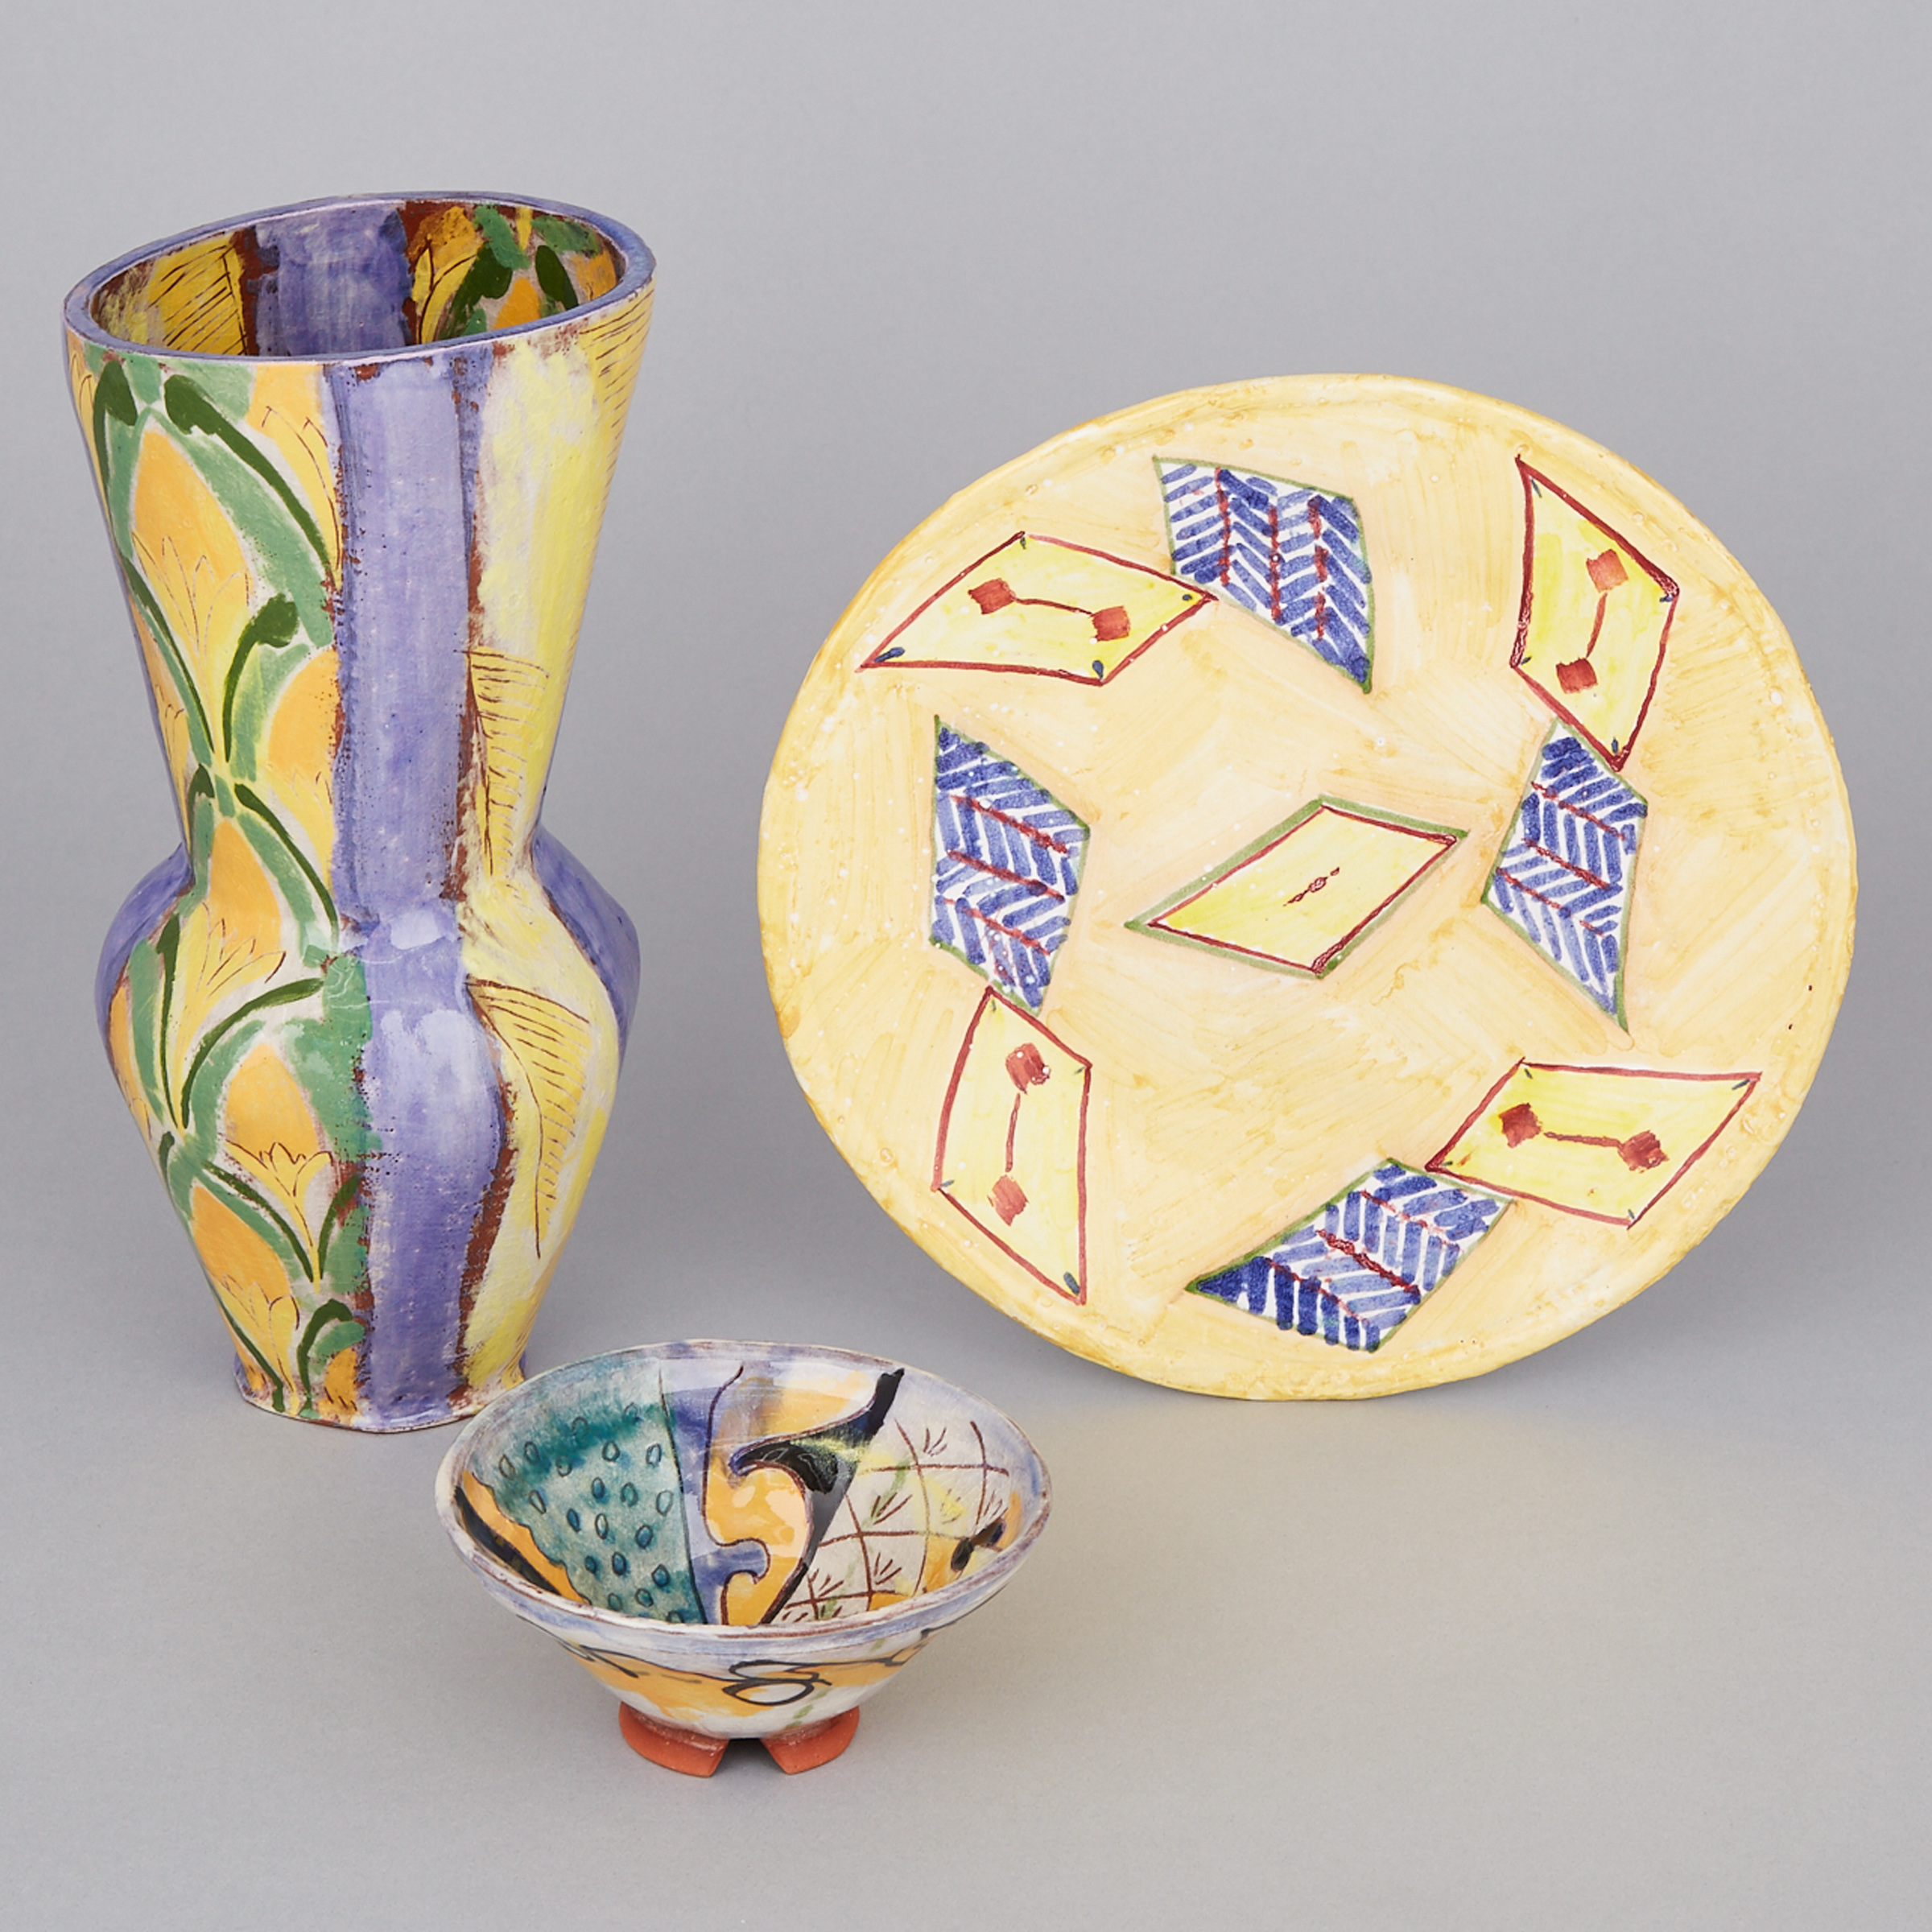 Ian Symons (Canadian, b.1959) 
Vase, Small Bowl and Plate, c.1985-86